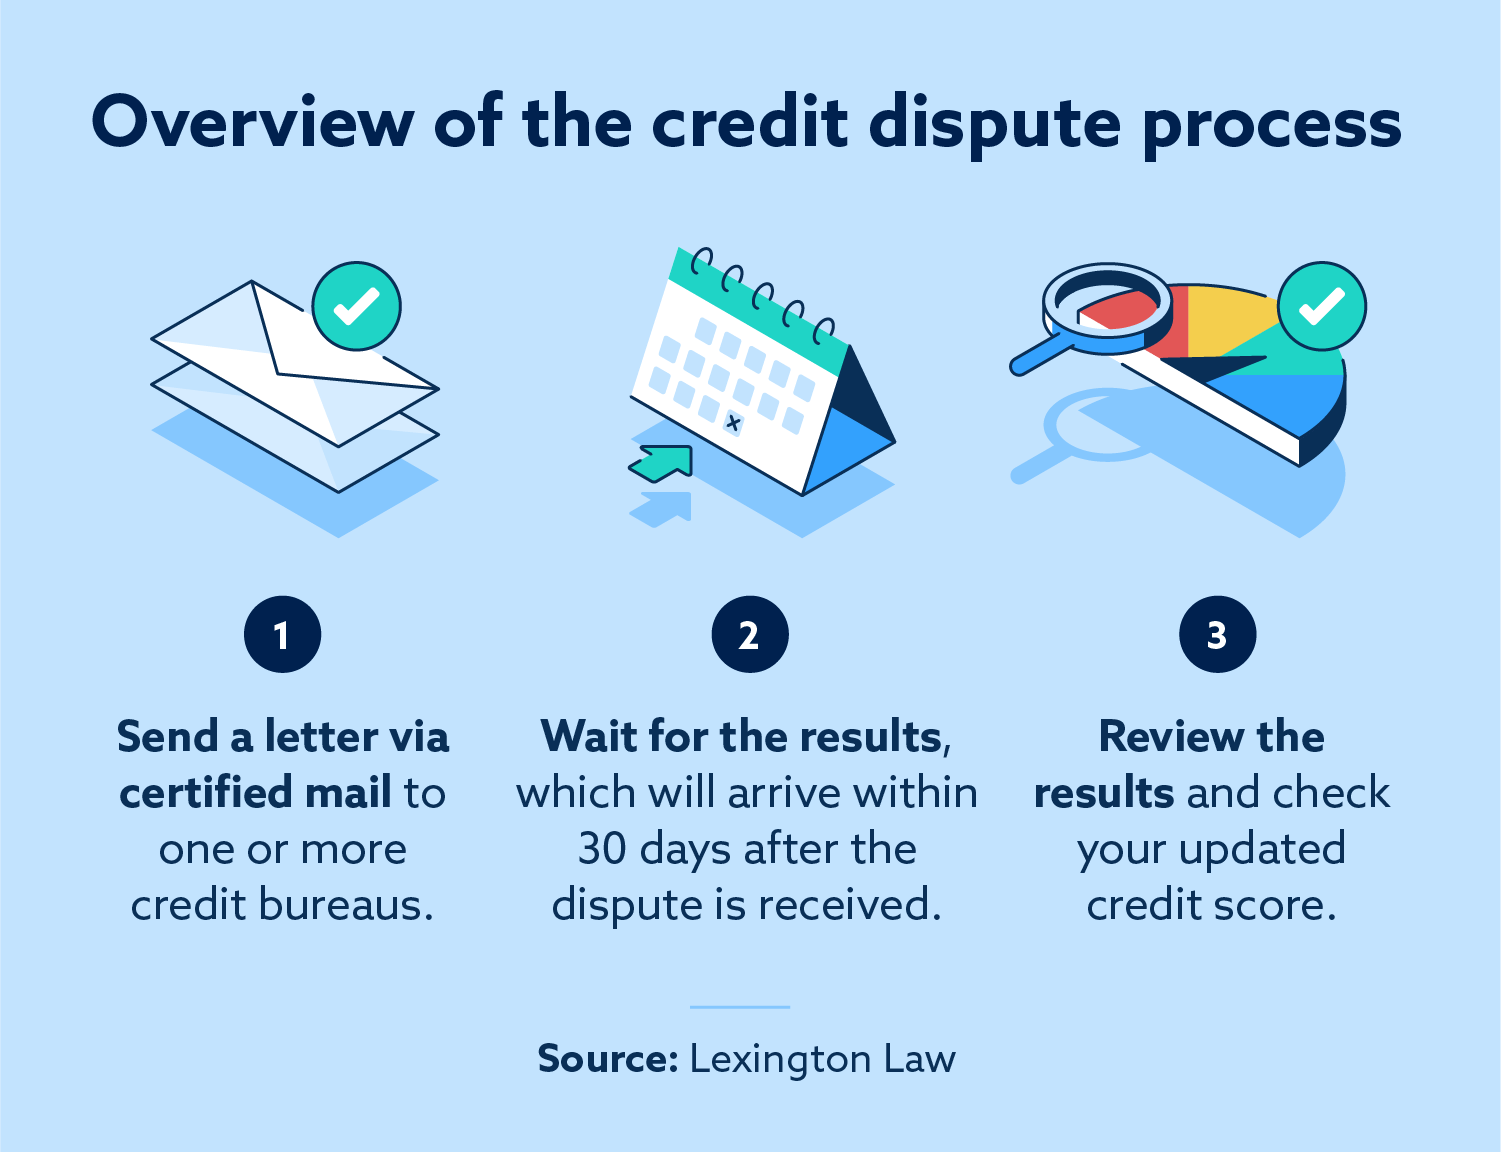 Overview of the credit dispute process